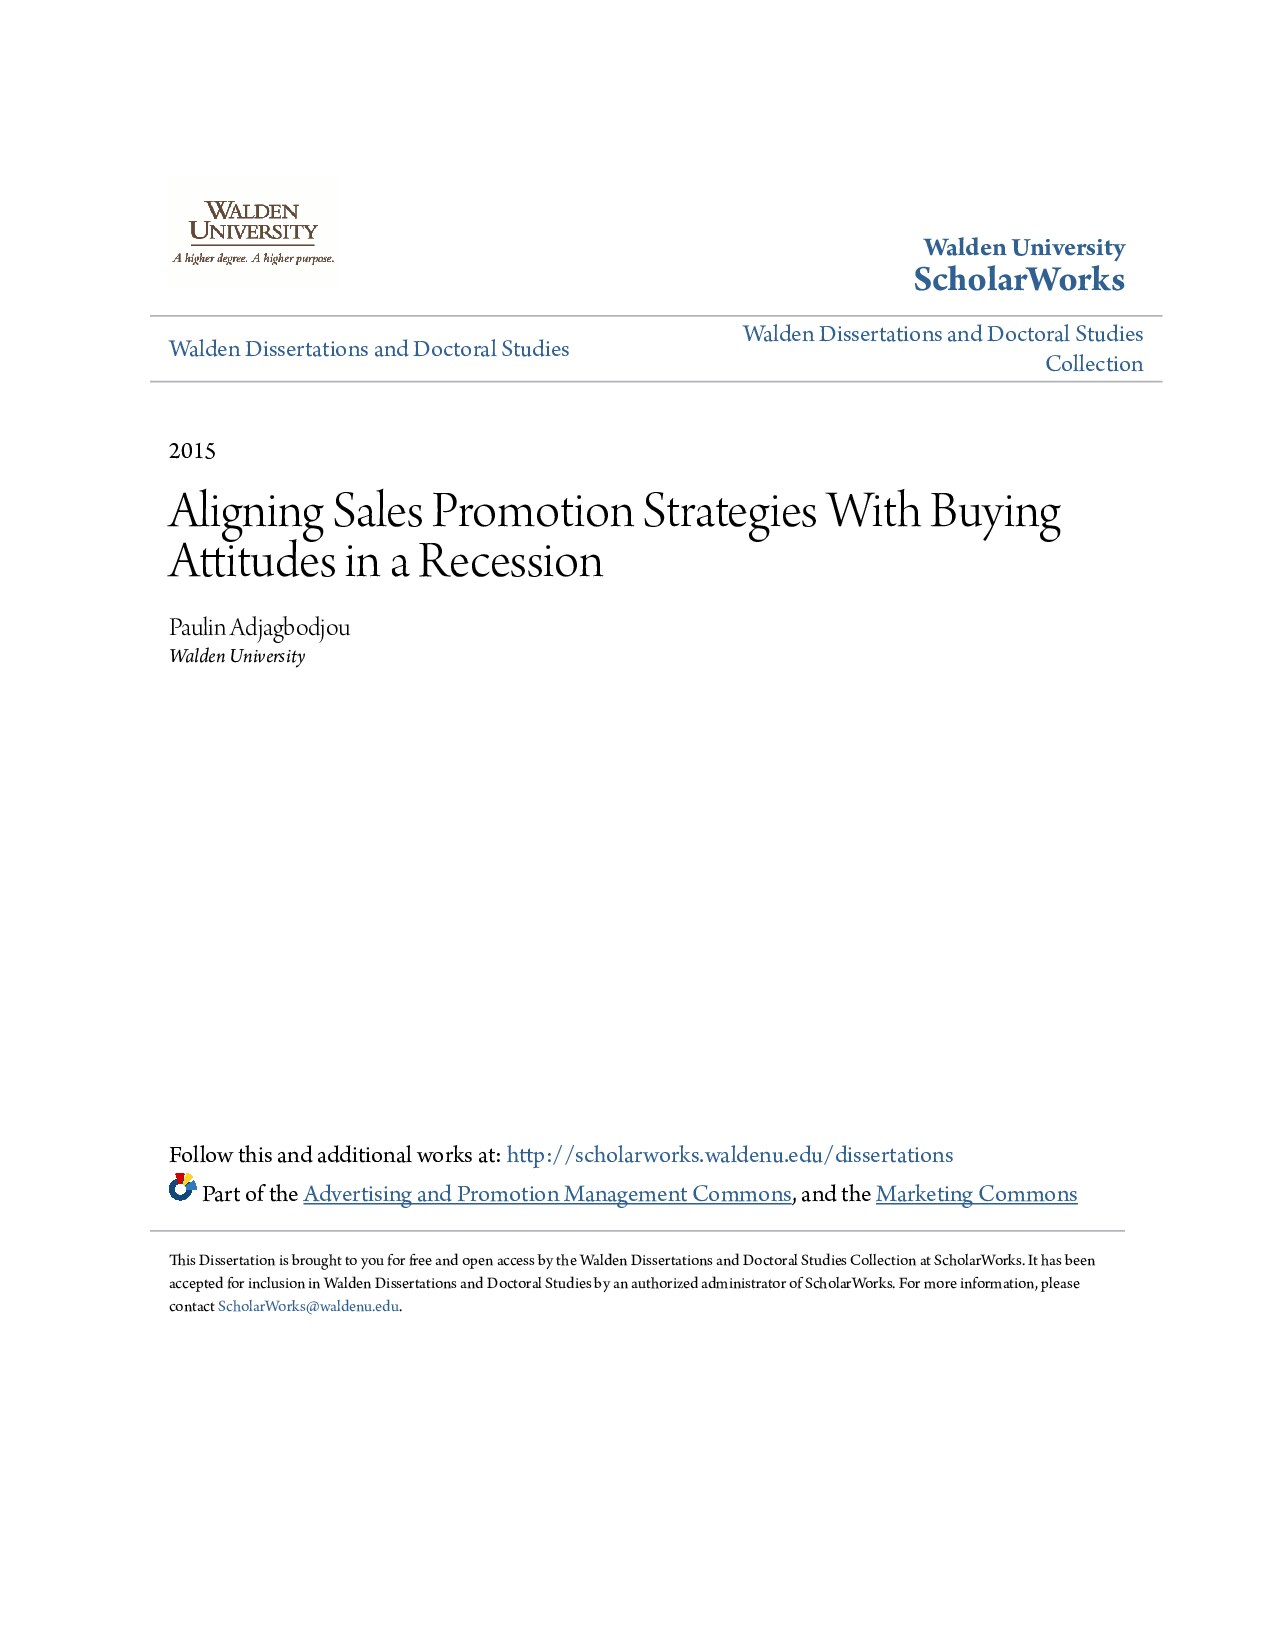 Aligning Sales Promotion Strategies With Buying Attitudes in a Recession